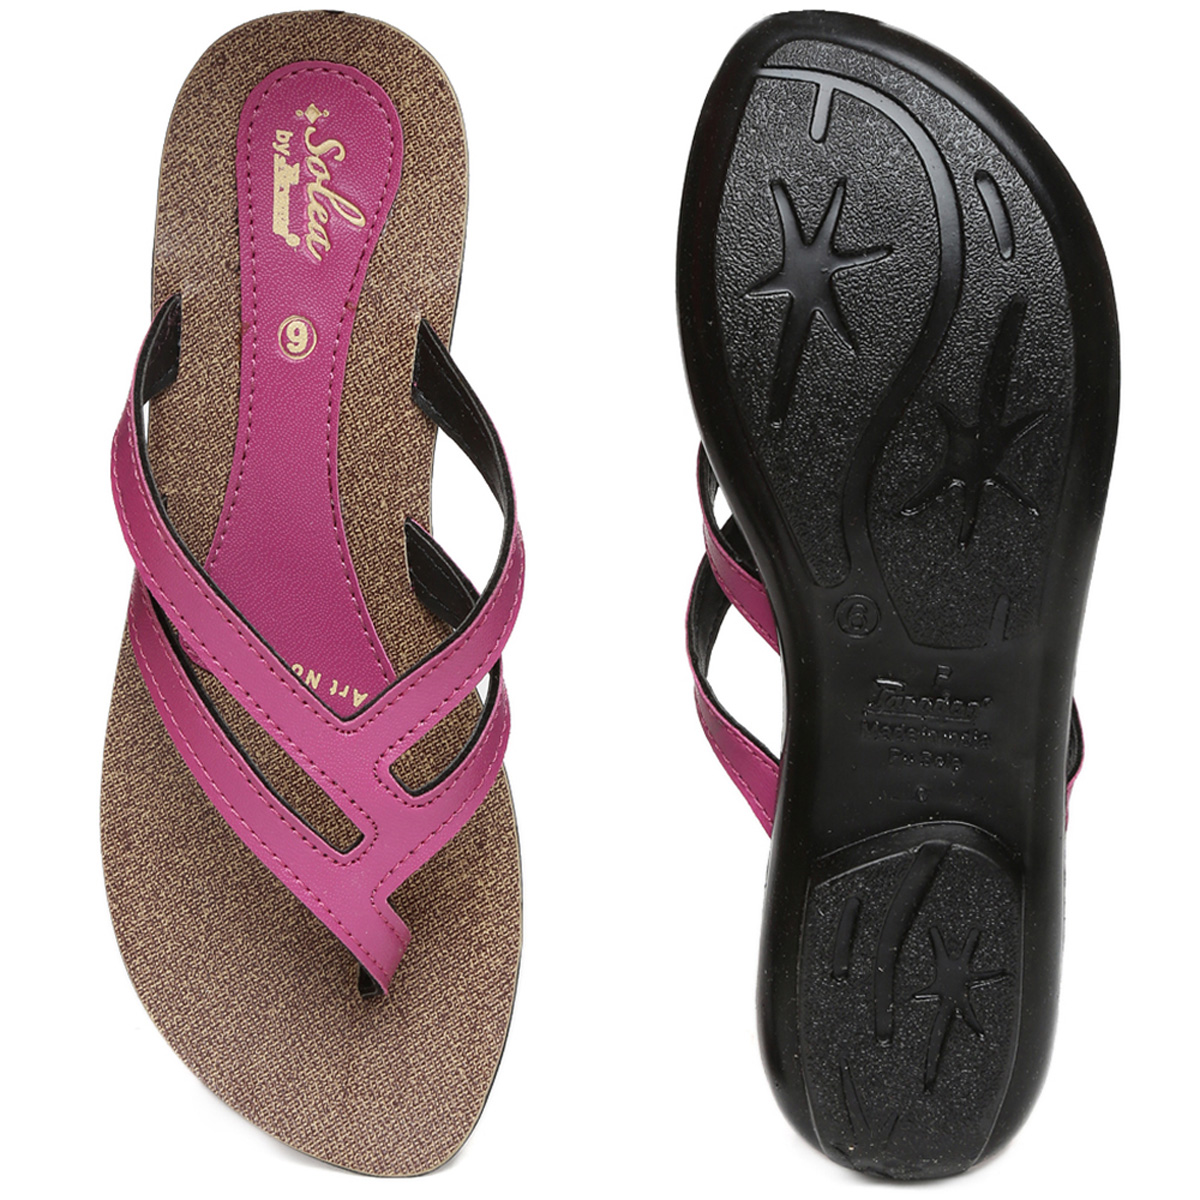 Buy Paragon Women'S Pink Wedge Slipper Online @ ₹219 from ShopClues